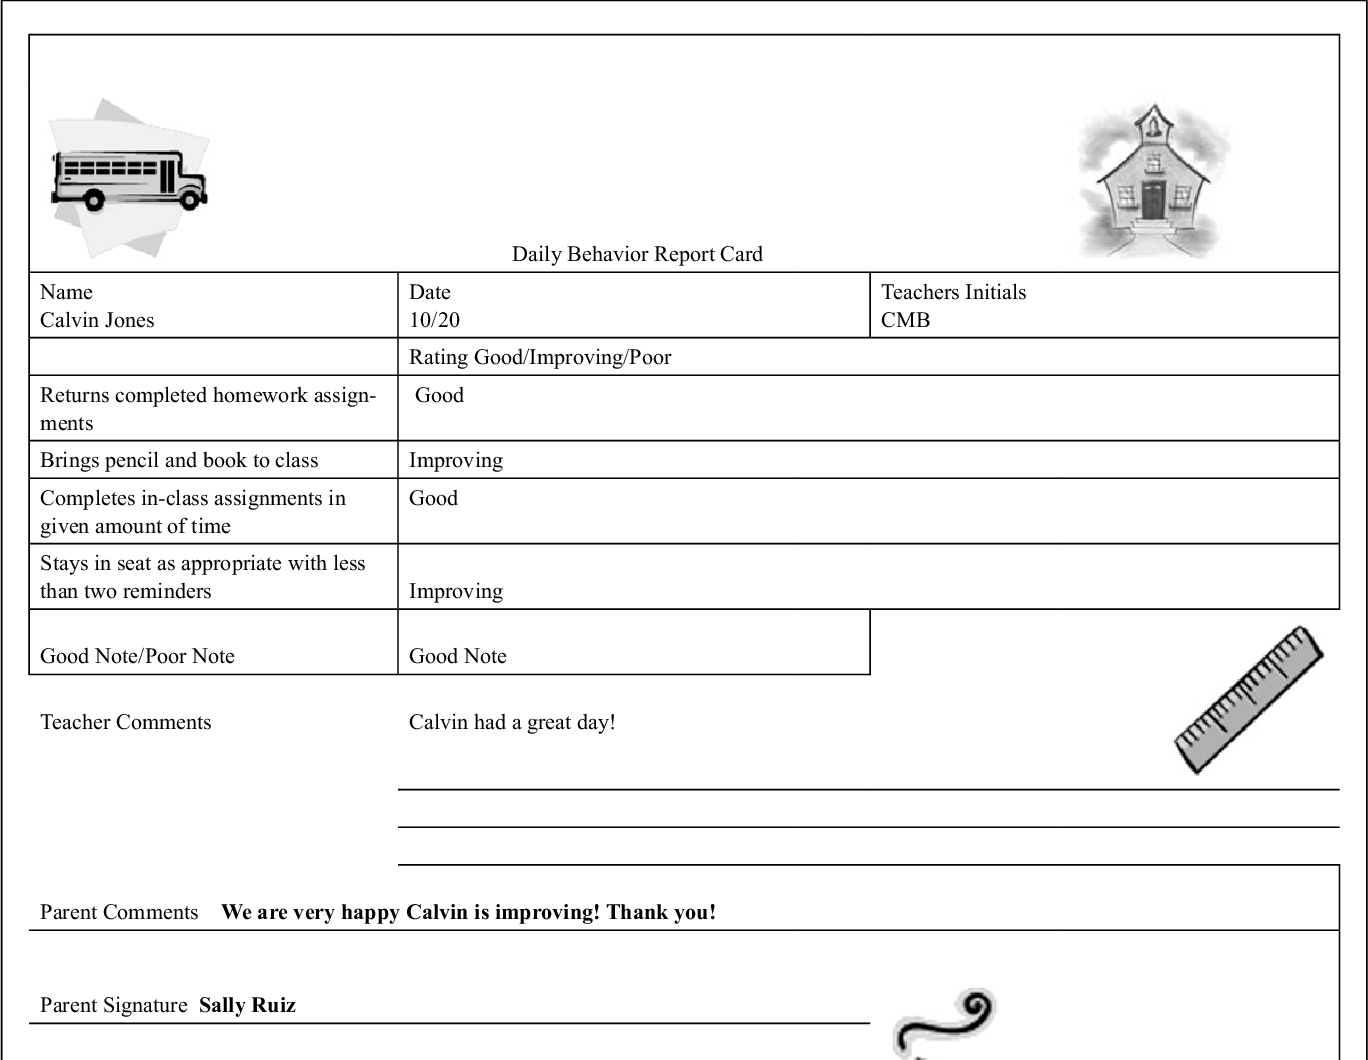 Pdf] Calvin Won't Sit Down! The Daily Behavior Report Card With Daily Report Card Template For Adhd